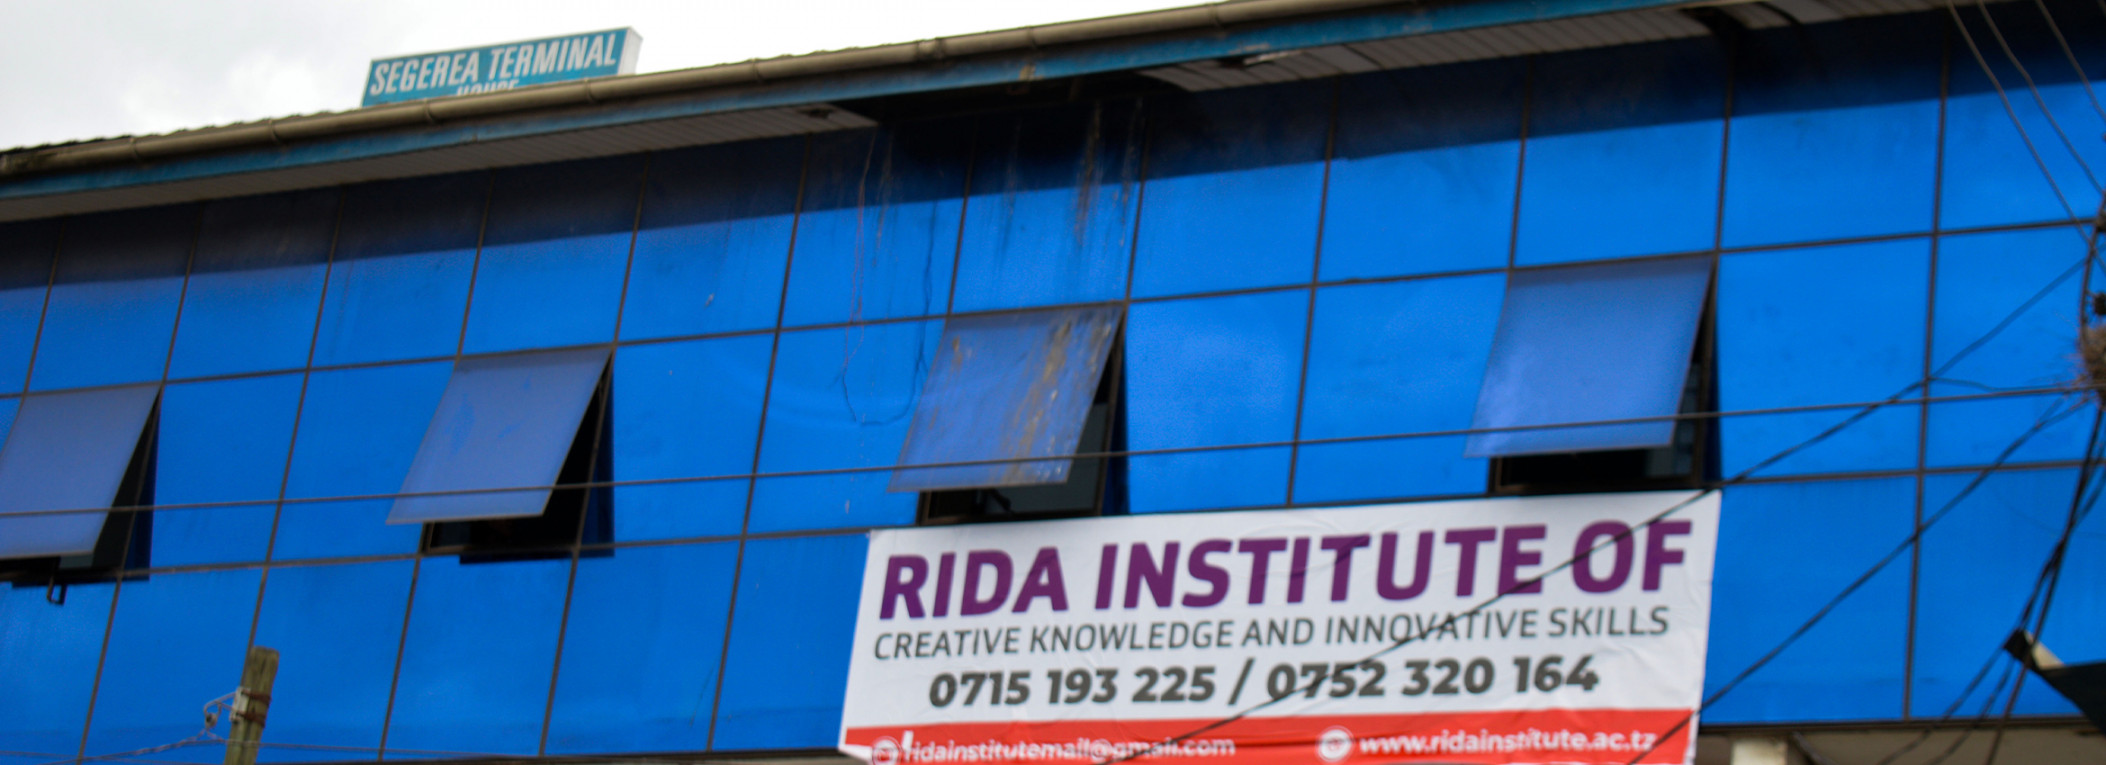 Rida Institute of Creative Knowledge and Innovation Skills